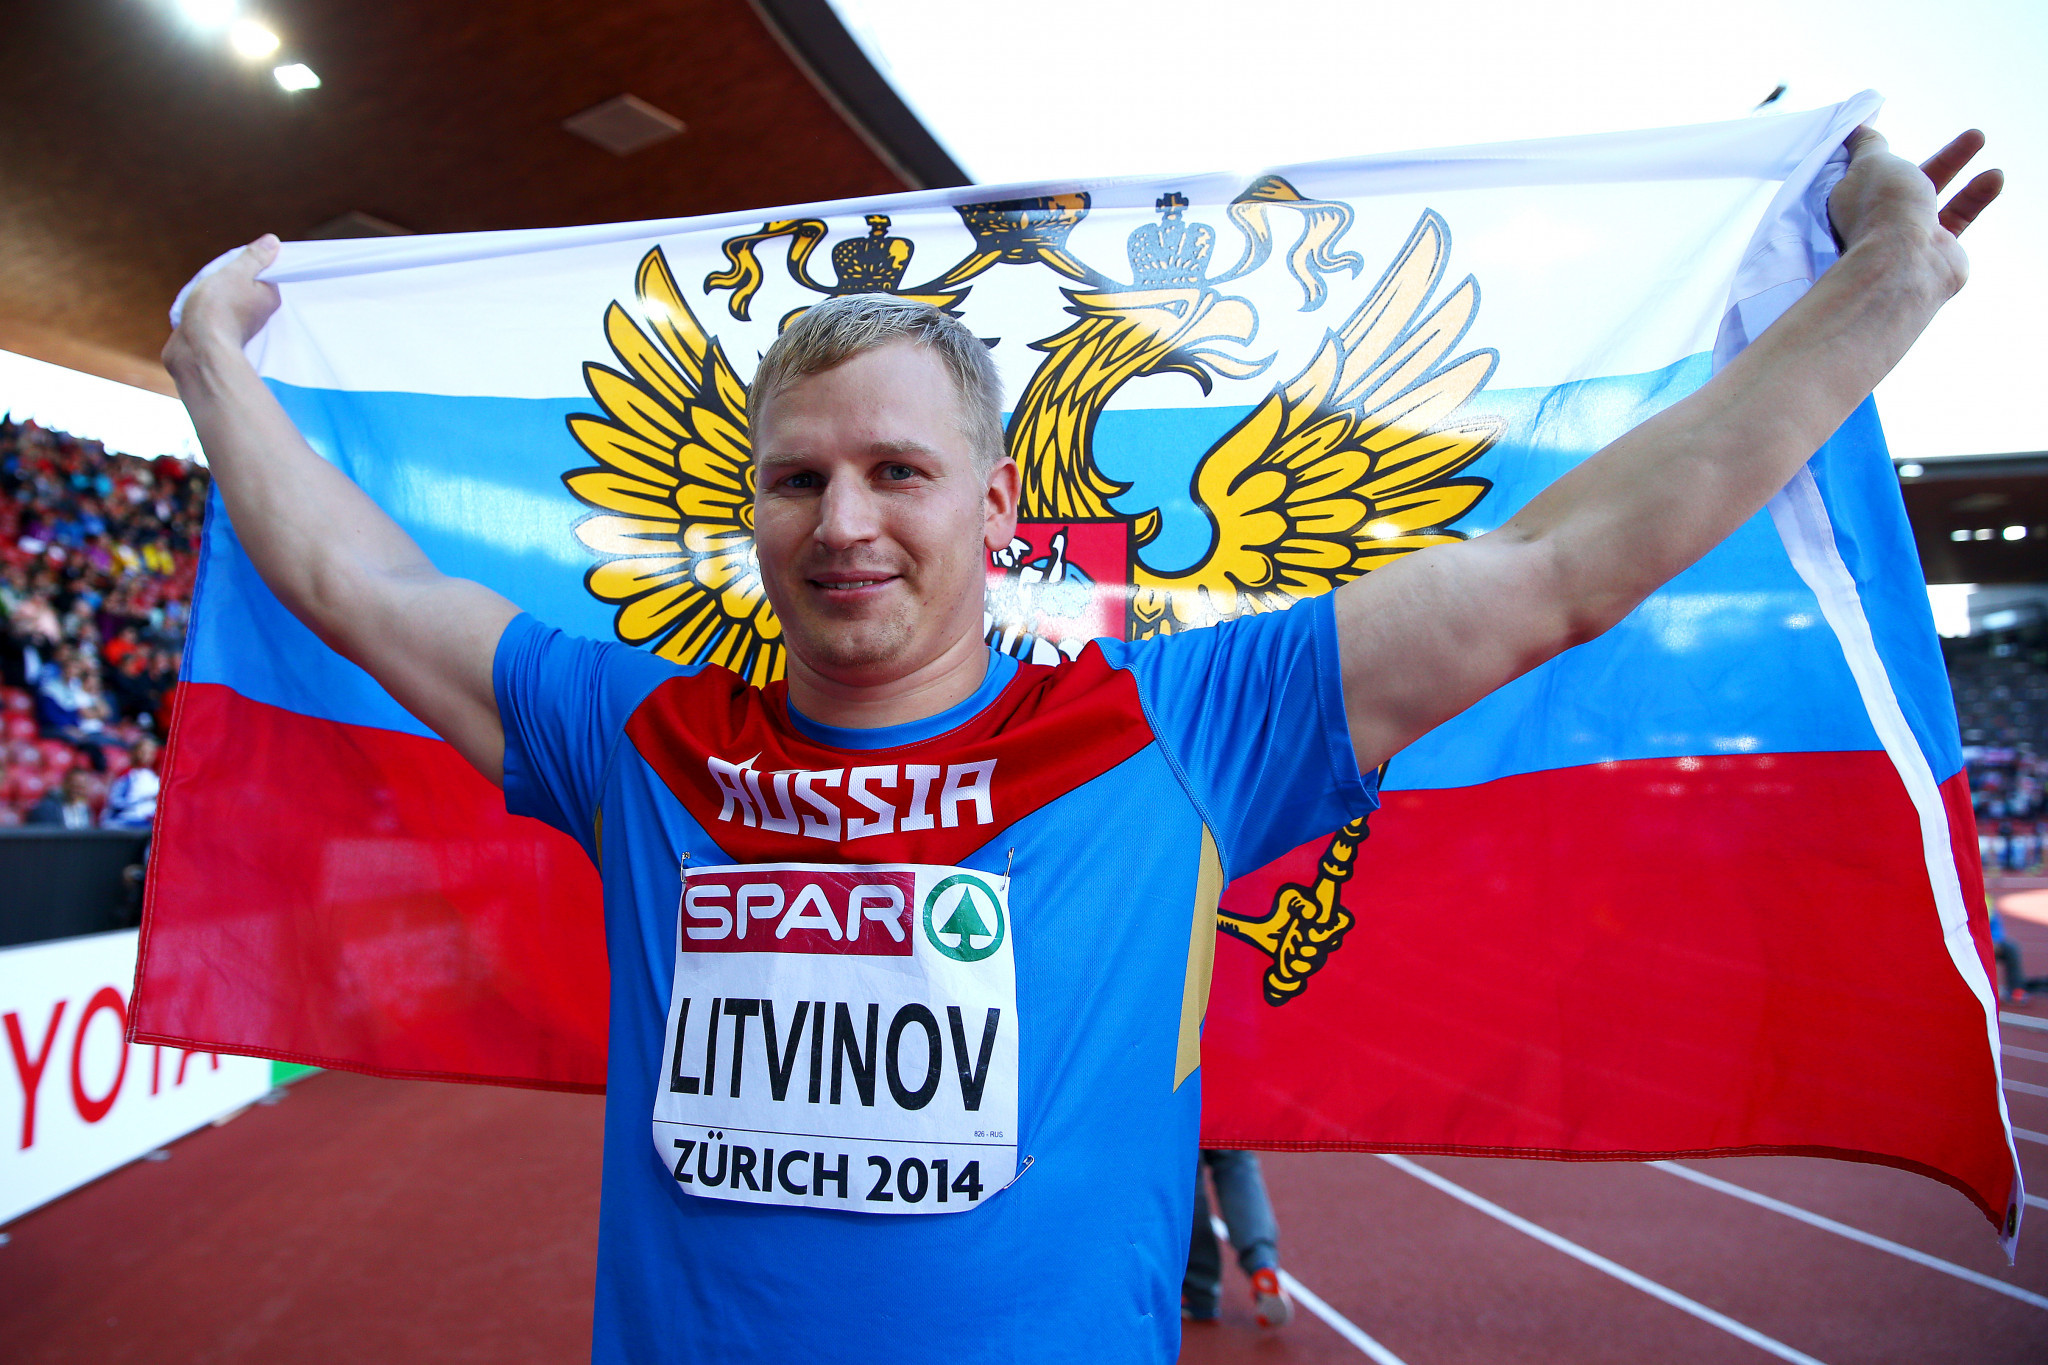 Russian hammer thrower set to be stripped of medals after confessing to doping